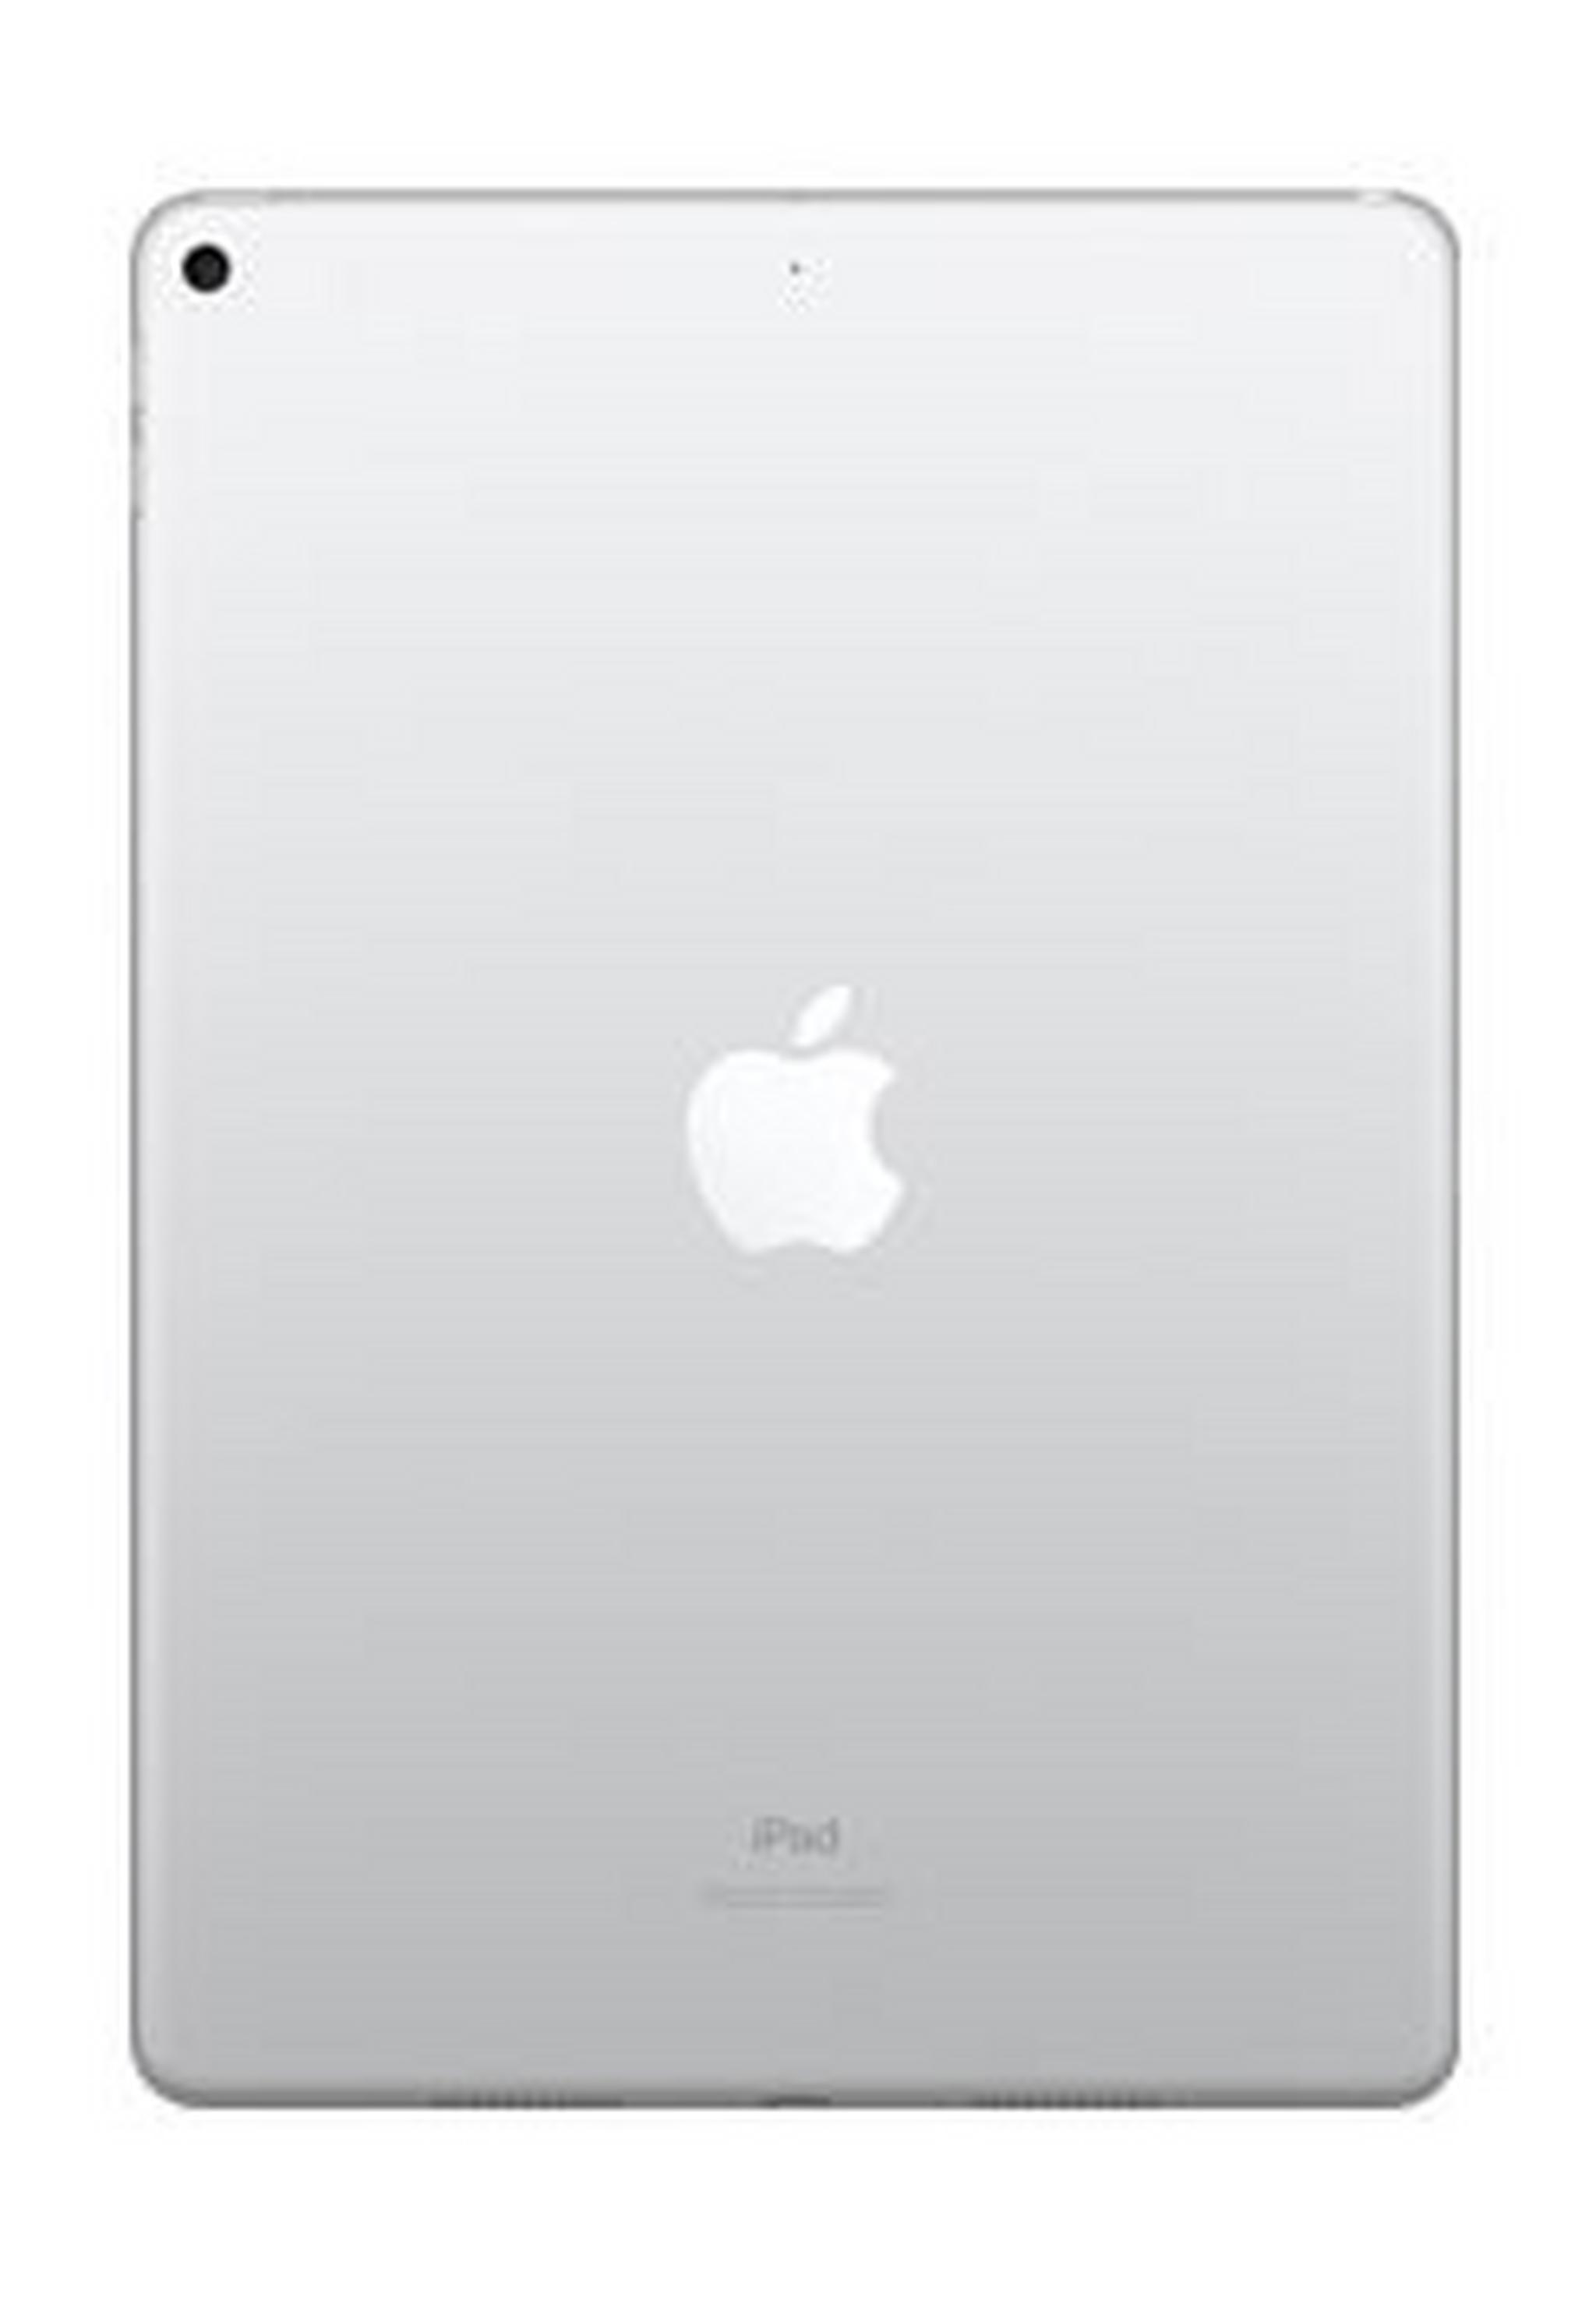 Apple iPad Air 2019 10.5-inch 64GB Wi-Fi Only Tablet - Silver